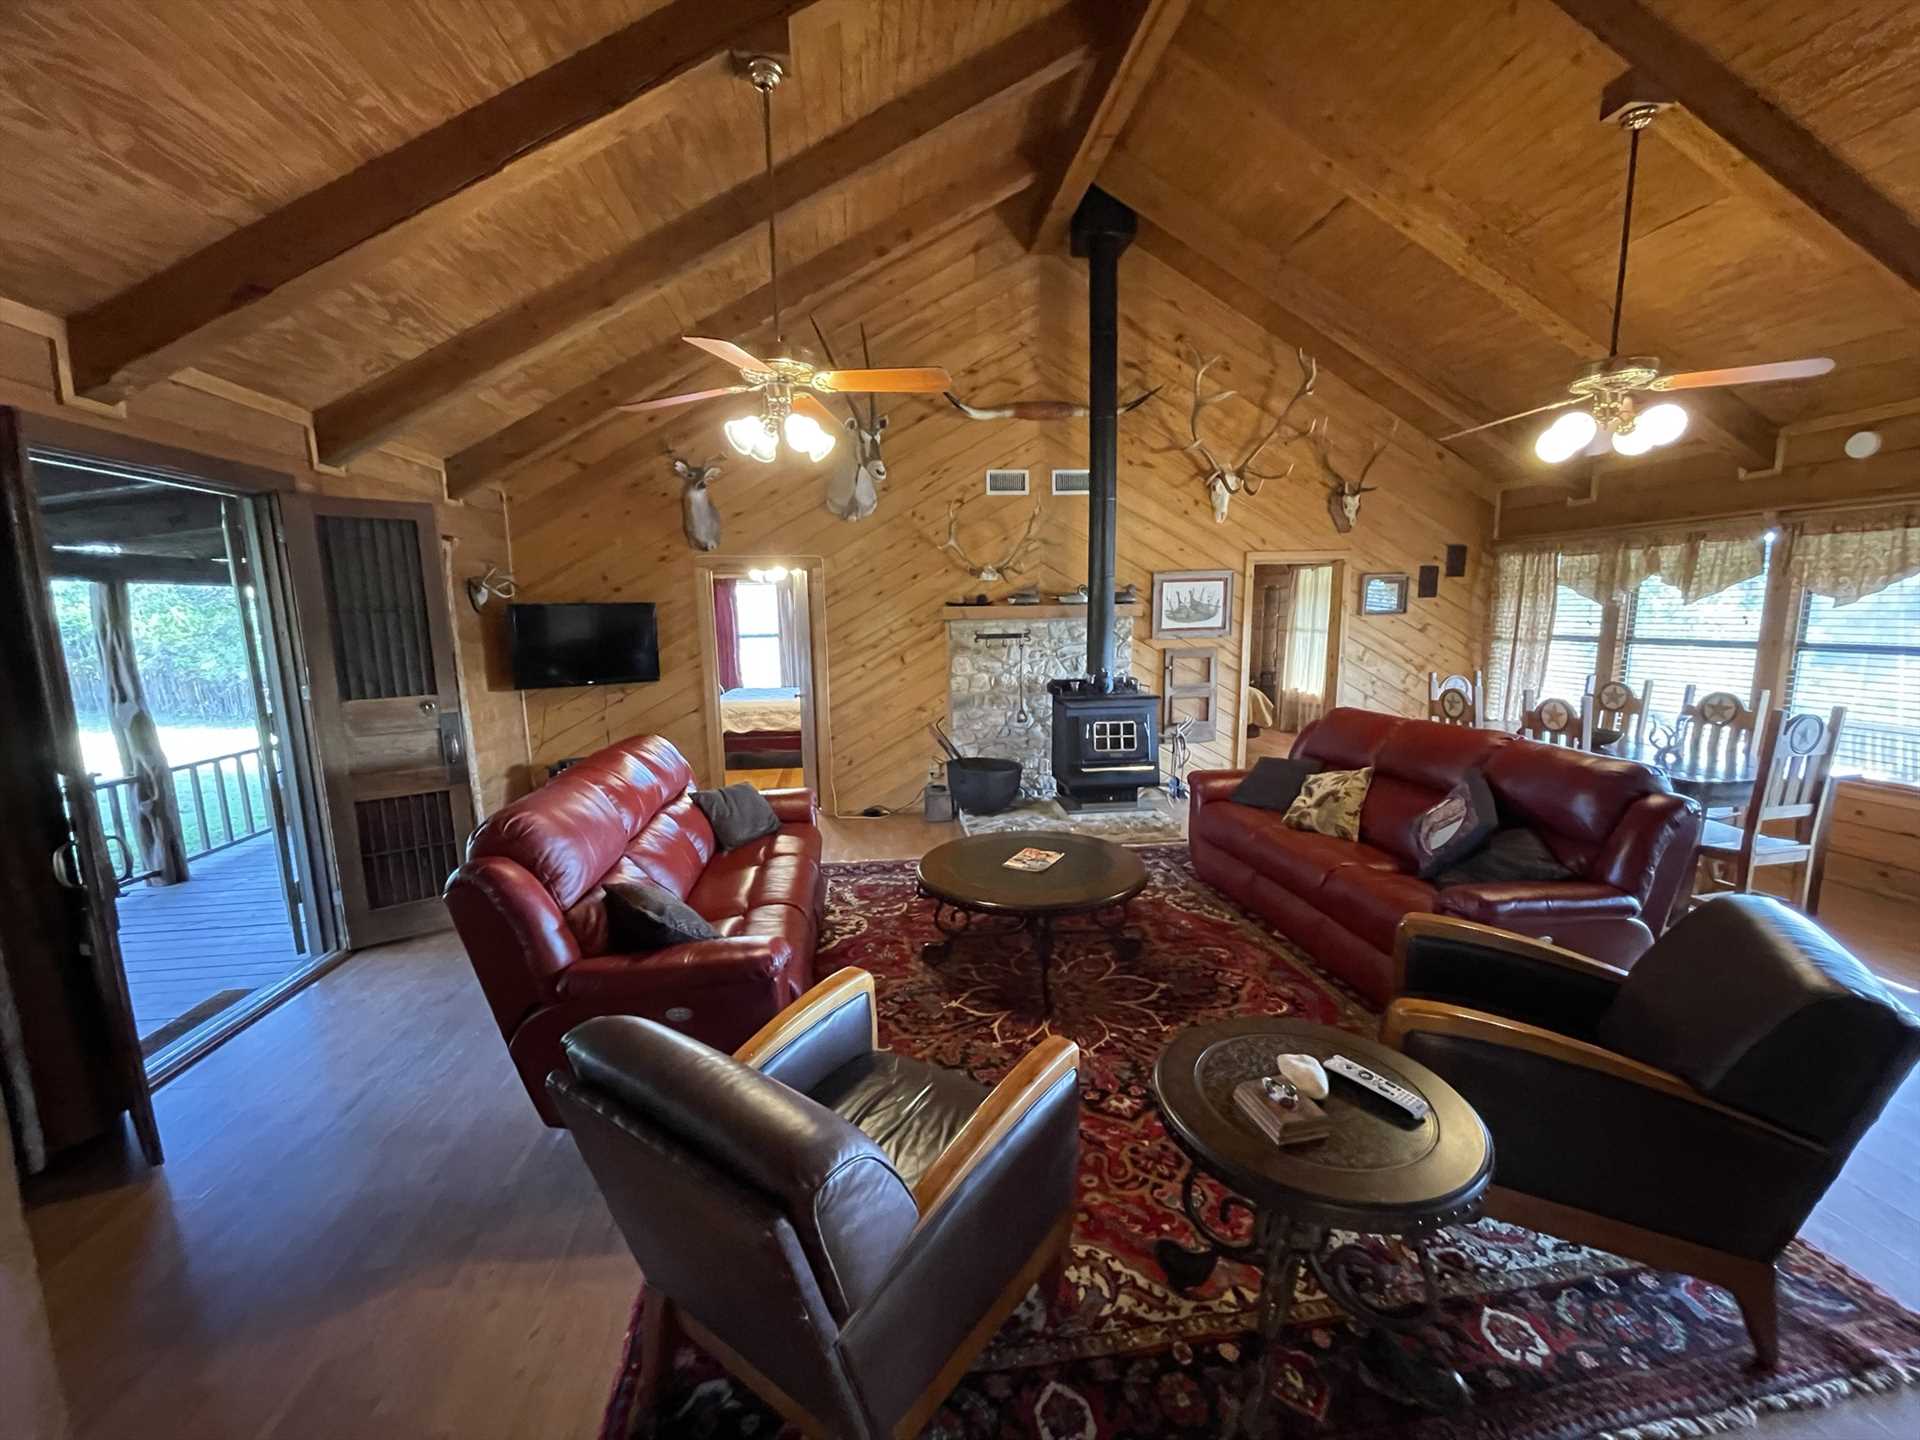                                                 High ceilings, golden woodwork, and tasteful furnishings create a restful living space for everyone at the Lodge.